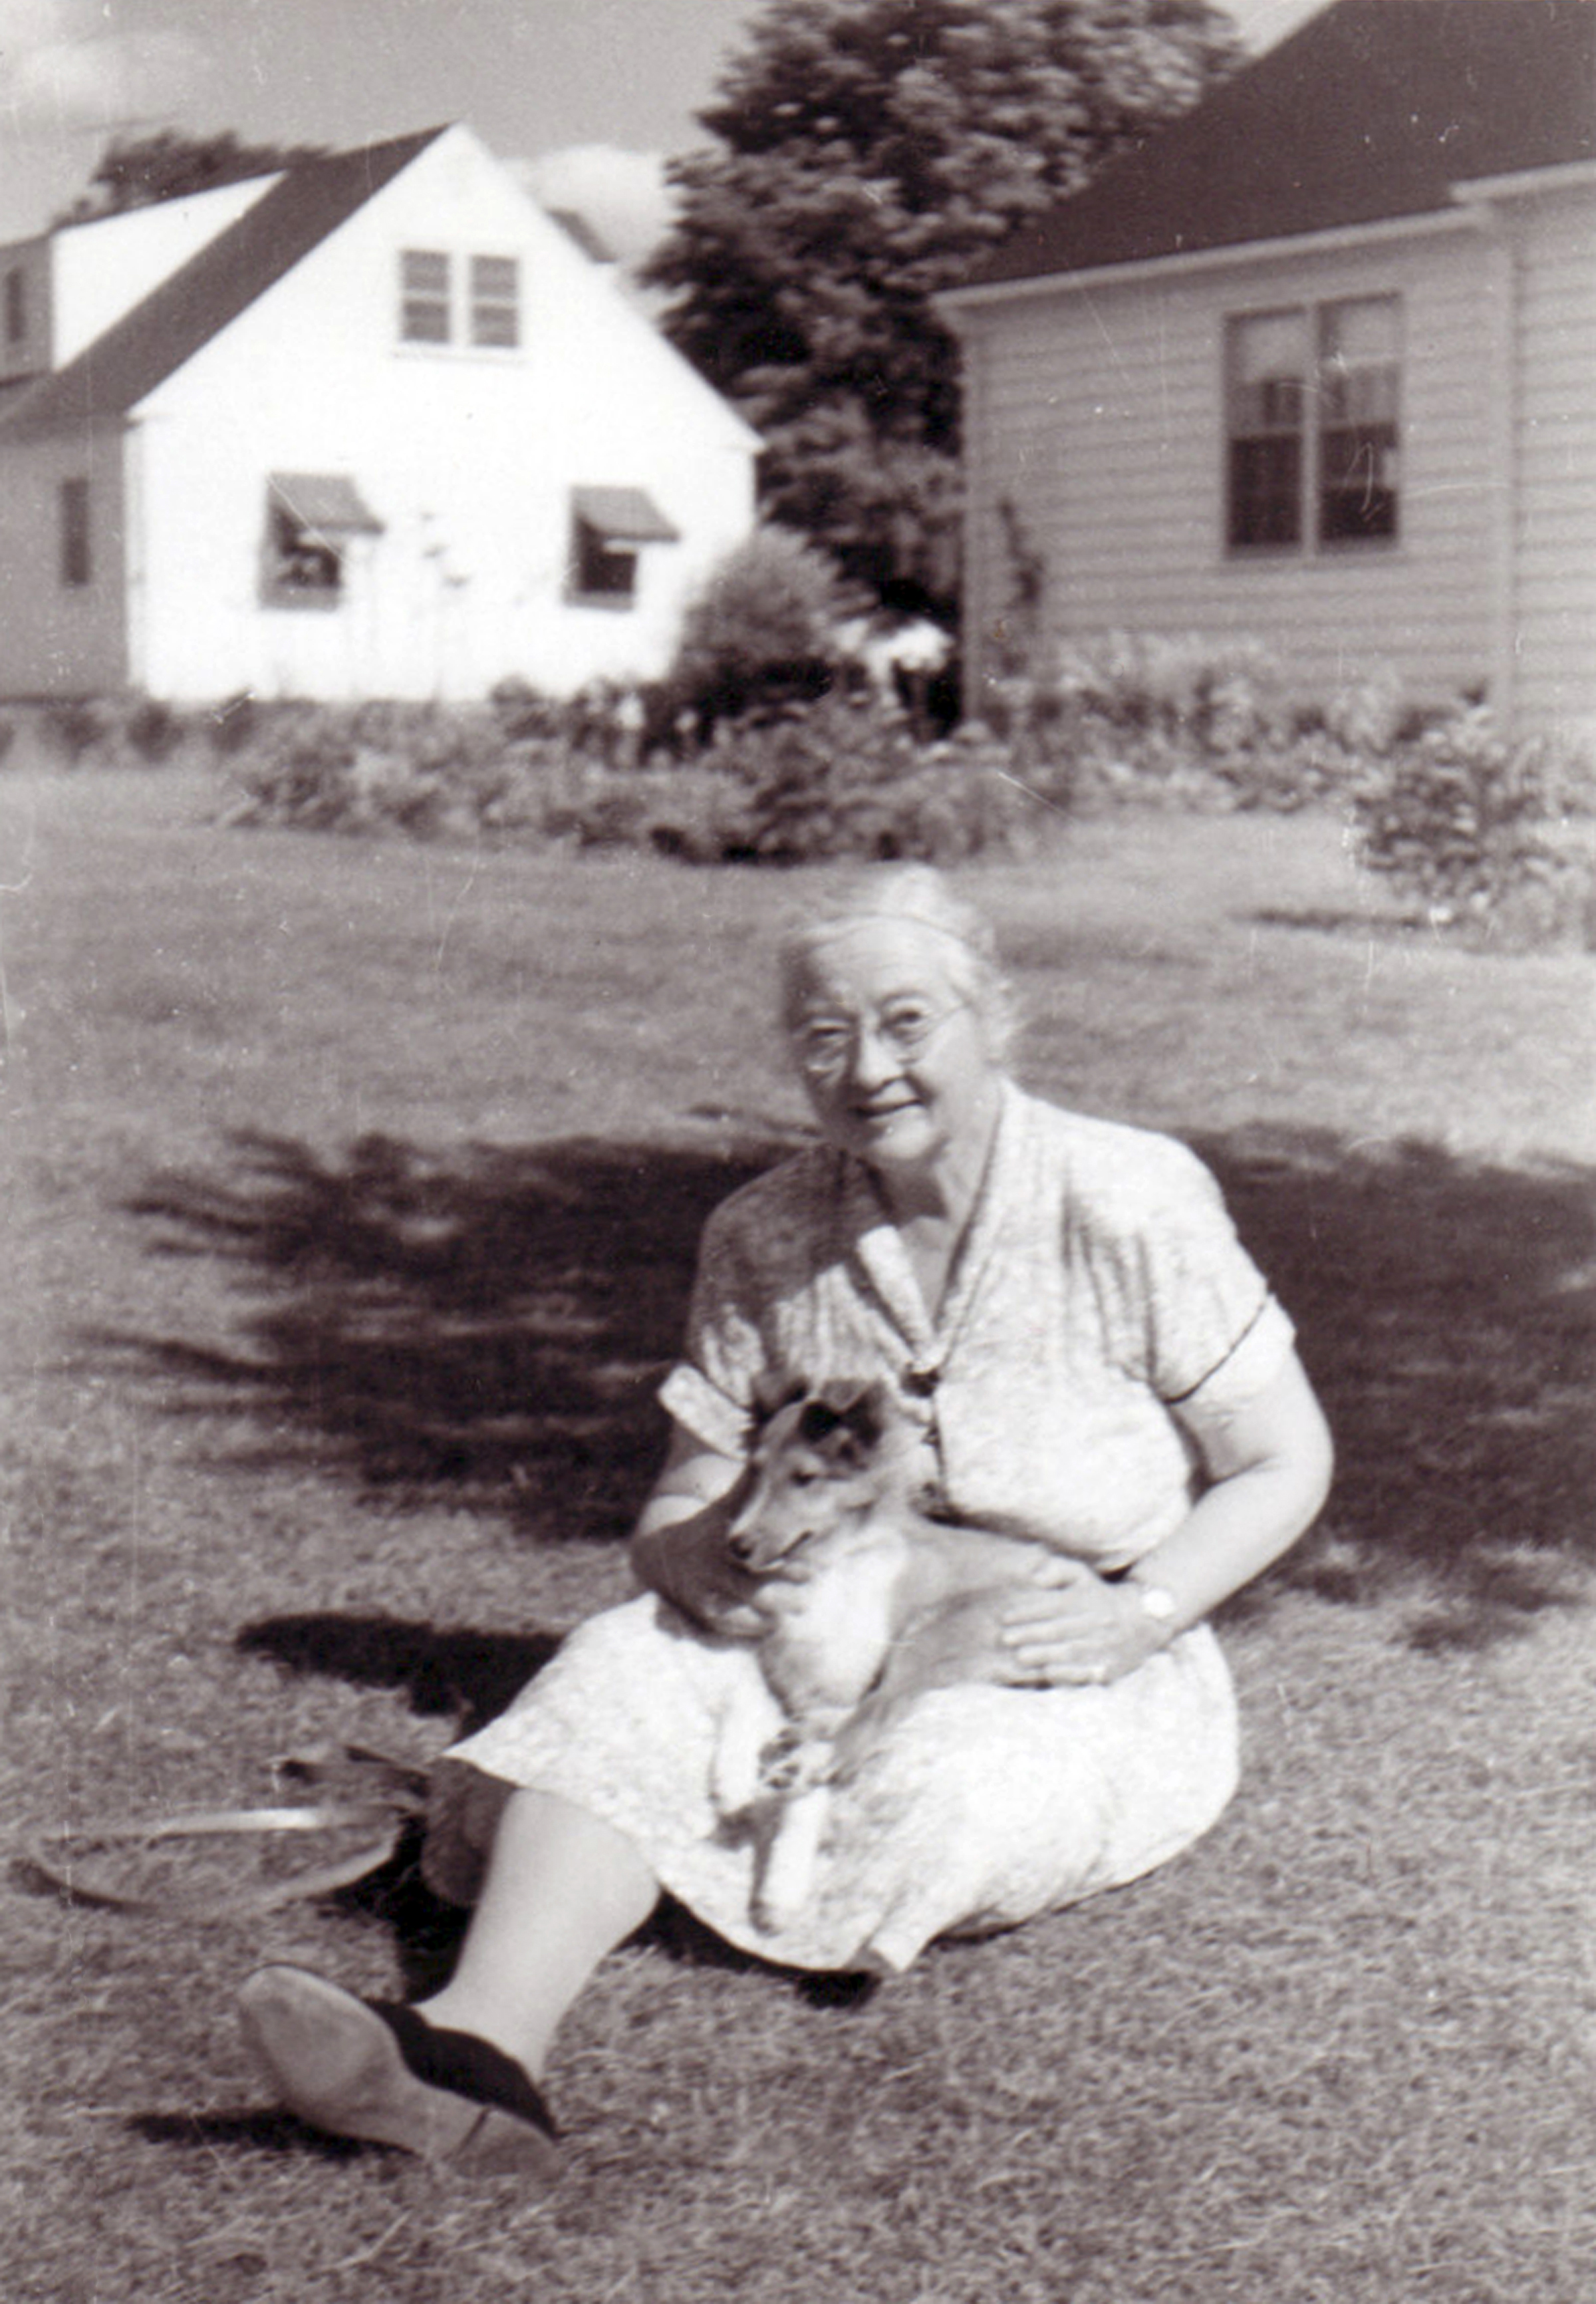 Mildred Allen sits with her dog in their yard in South Hadley Massachusetts